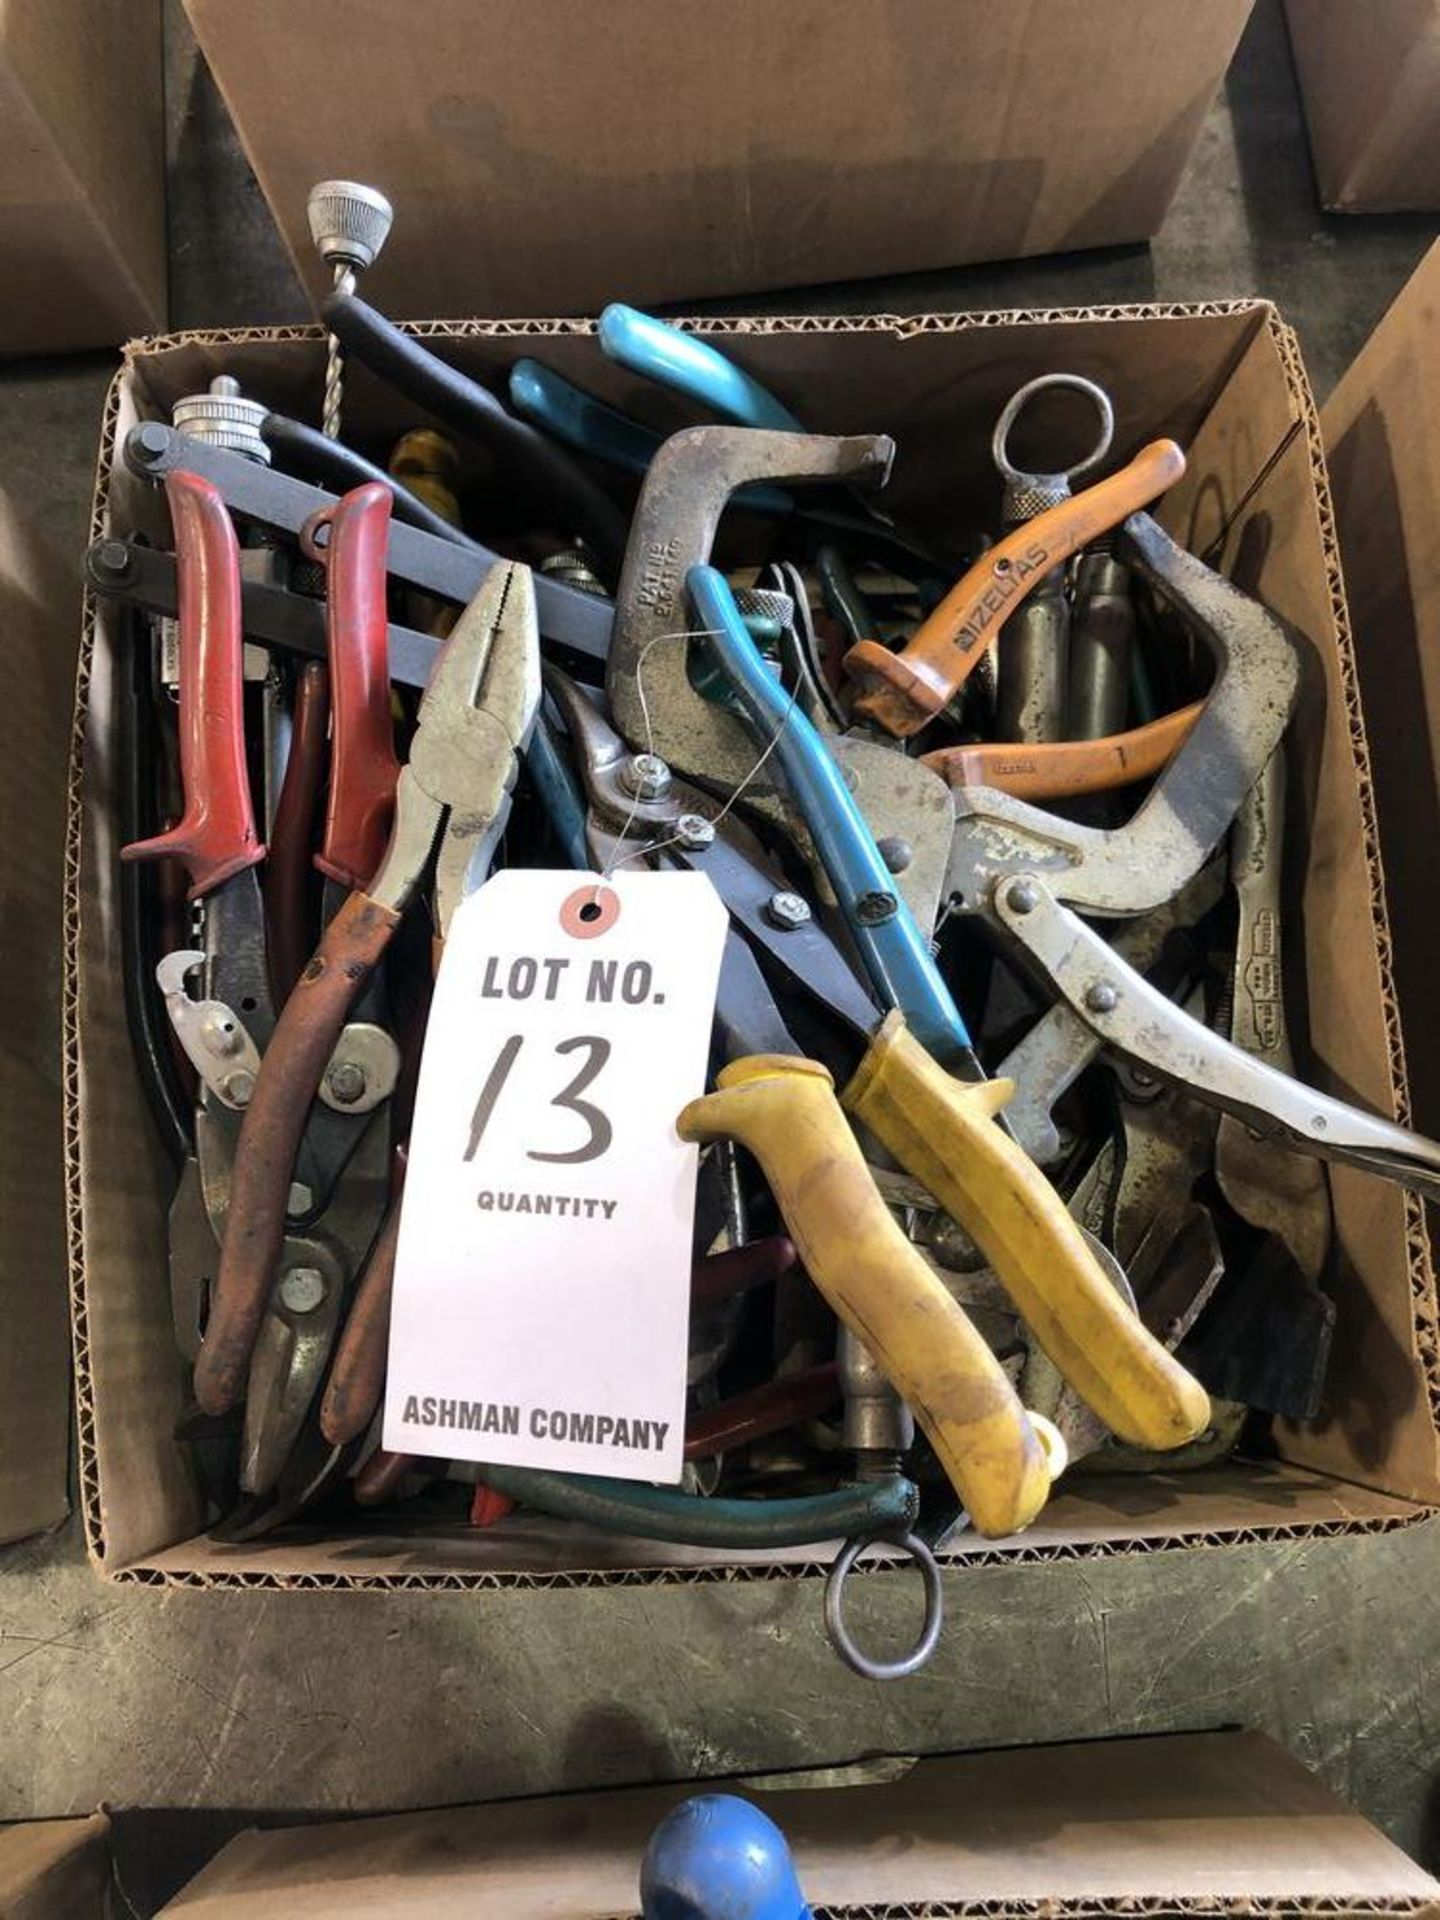 (LOT) MISC SHEARS, PLIERS, WIRE CUTTERS, VISE GRIP GLAMPS